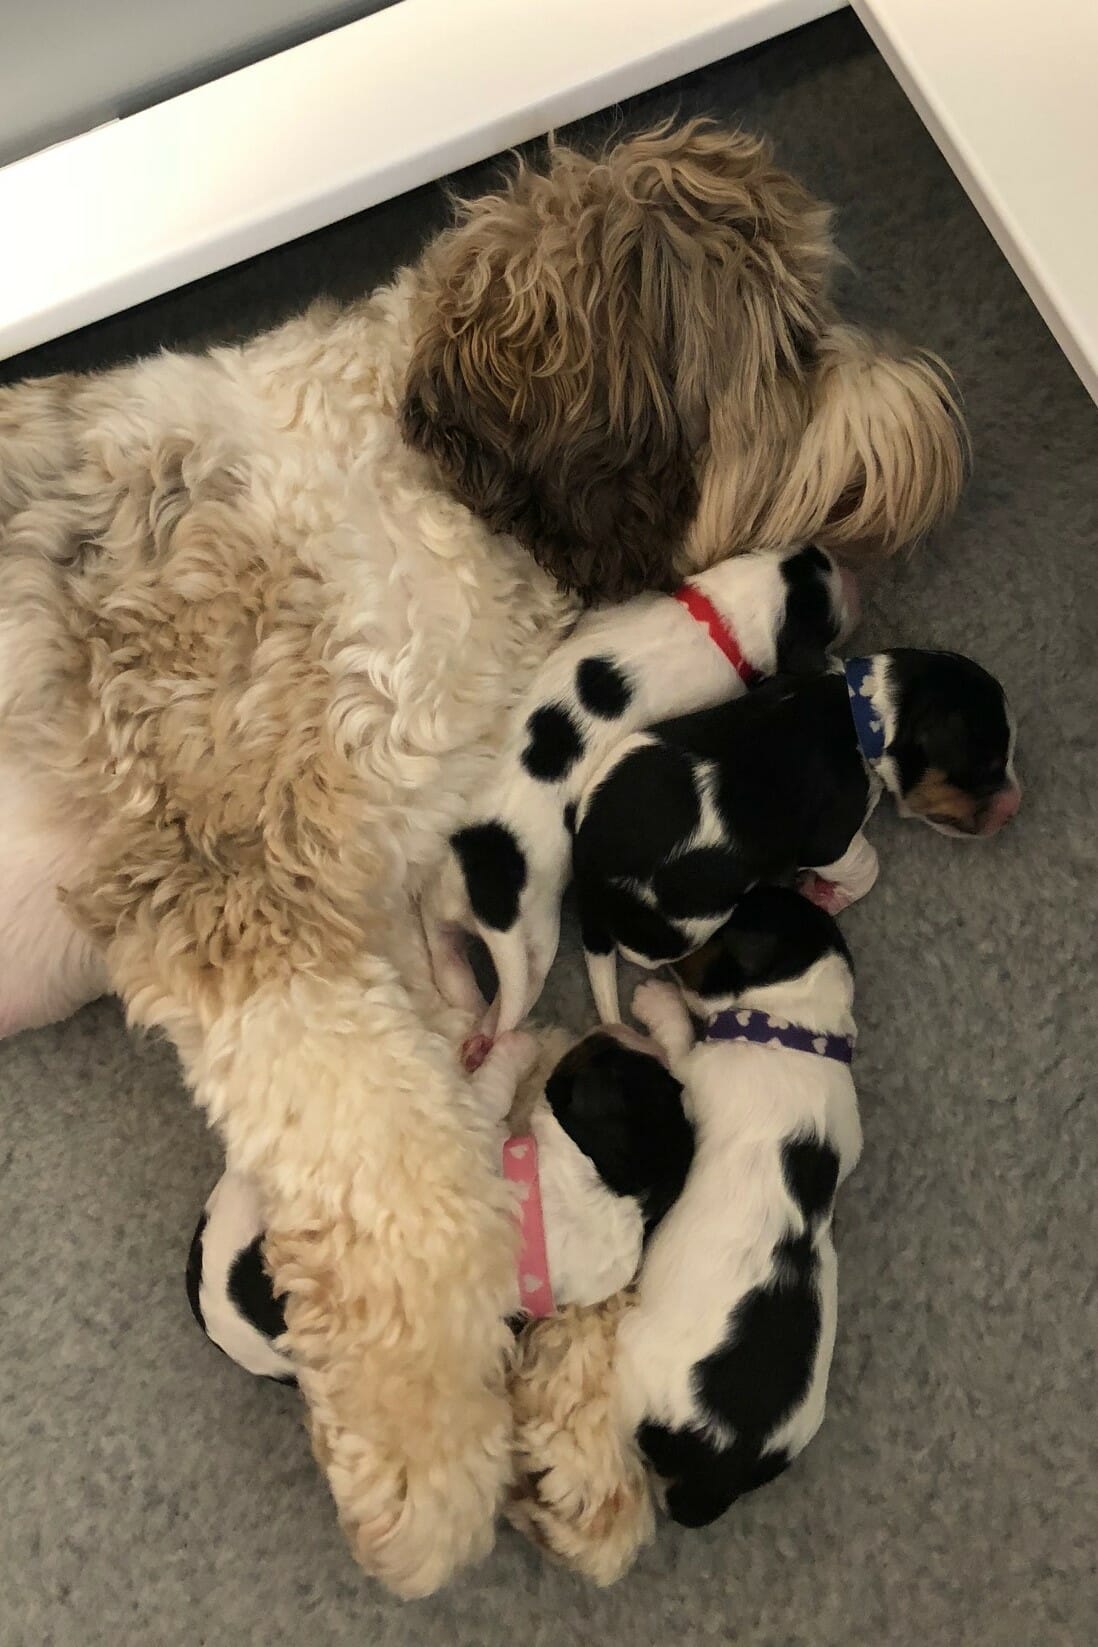 Photo taken from birds eye view. A cream and tan labradoodle mom lying on her side with her four 1-week old black and white puppies cuddled against her. One puppy (wearing a pink collar) is being hugged between her arms. A white puppy with black spots on its back (red collar) is lying against Moms neck. Beside that puppy is a mostly black one with white stripes and a blue collar. The fourth puppy has its head against the black puppys tummy and is mostly white with a black stripe down its back and a purple collar.